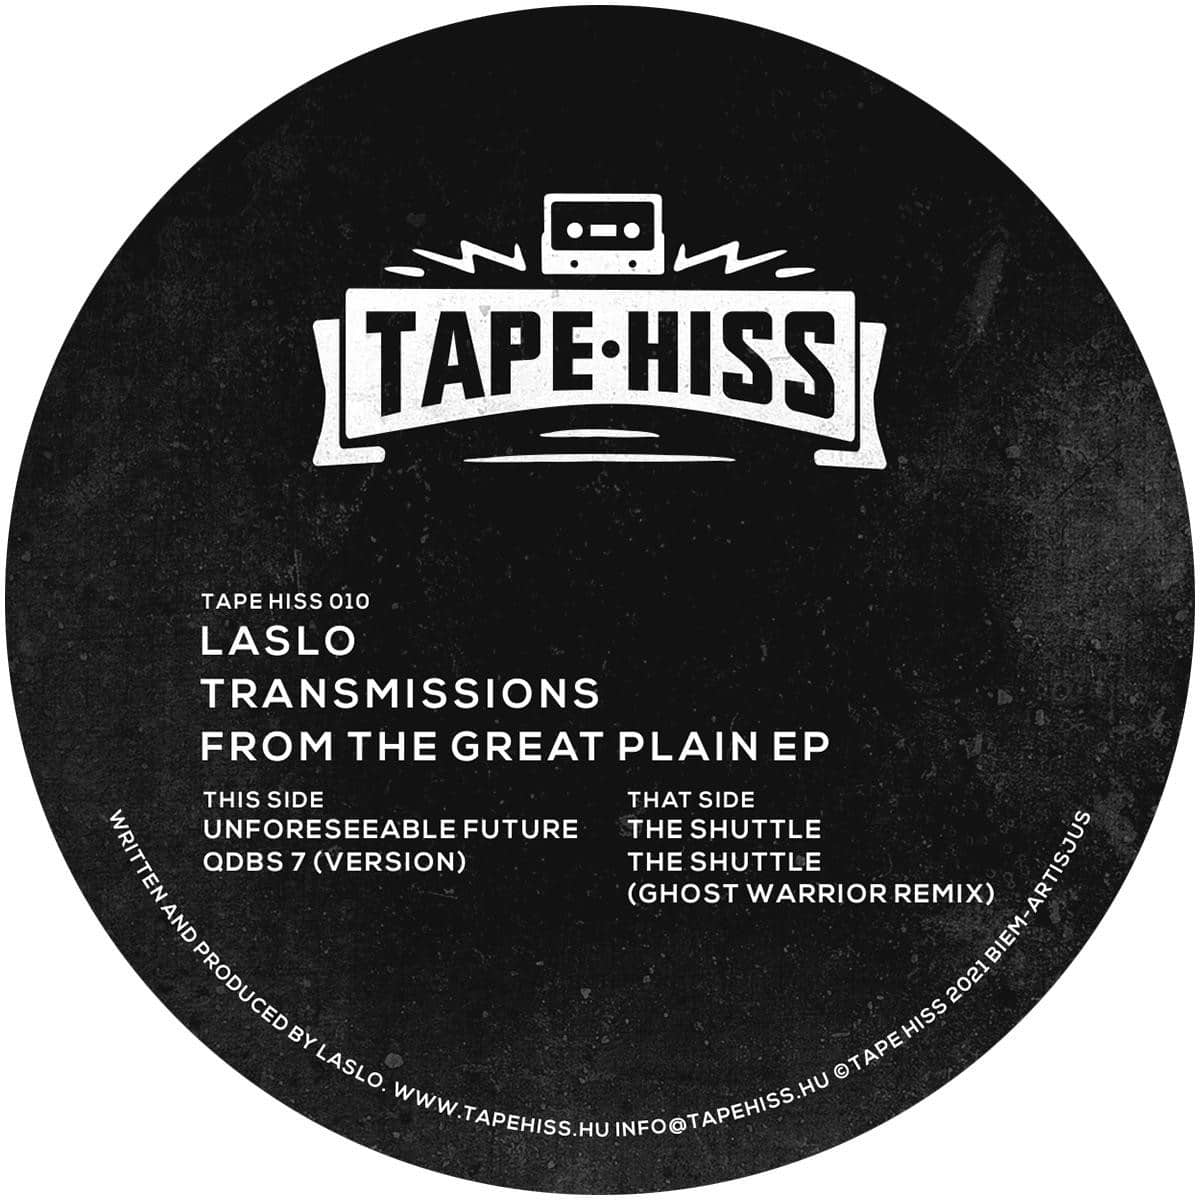 Laslo - Transmissions From The Great Plain Ep (Ghost Warrior remix) - TAPEHISS010 - TAPE HISS